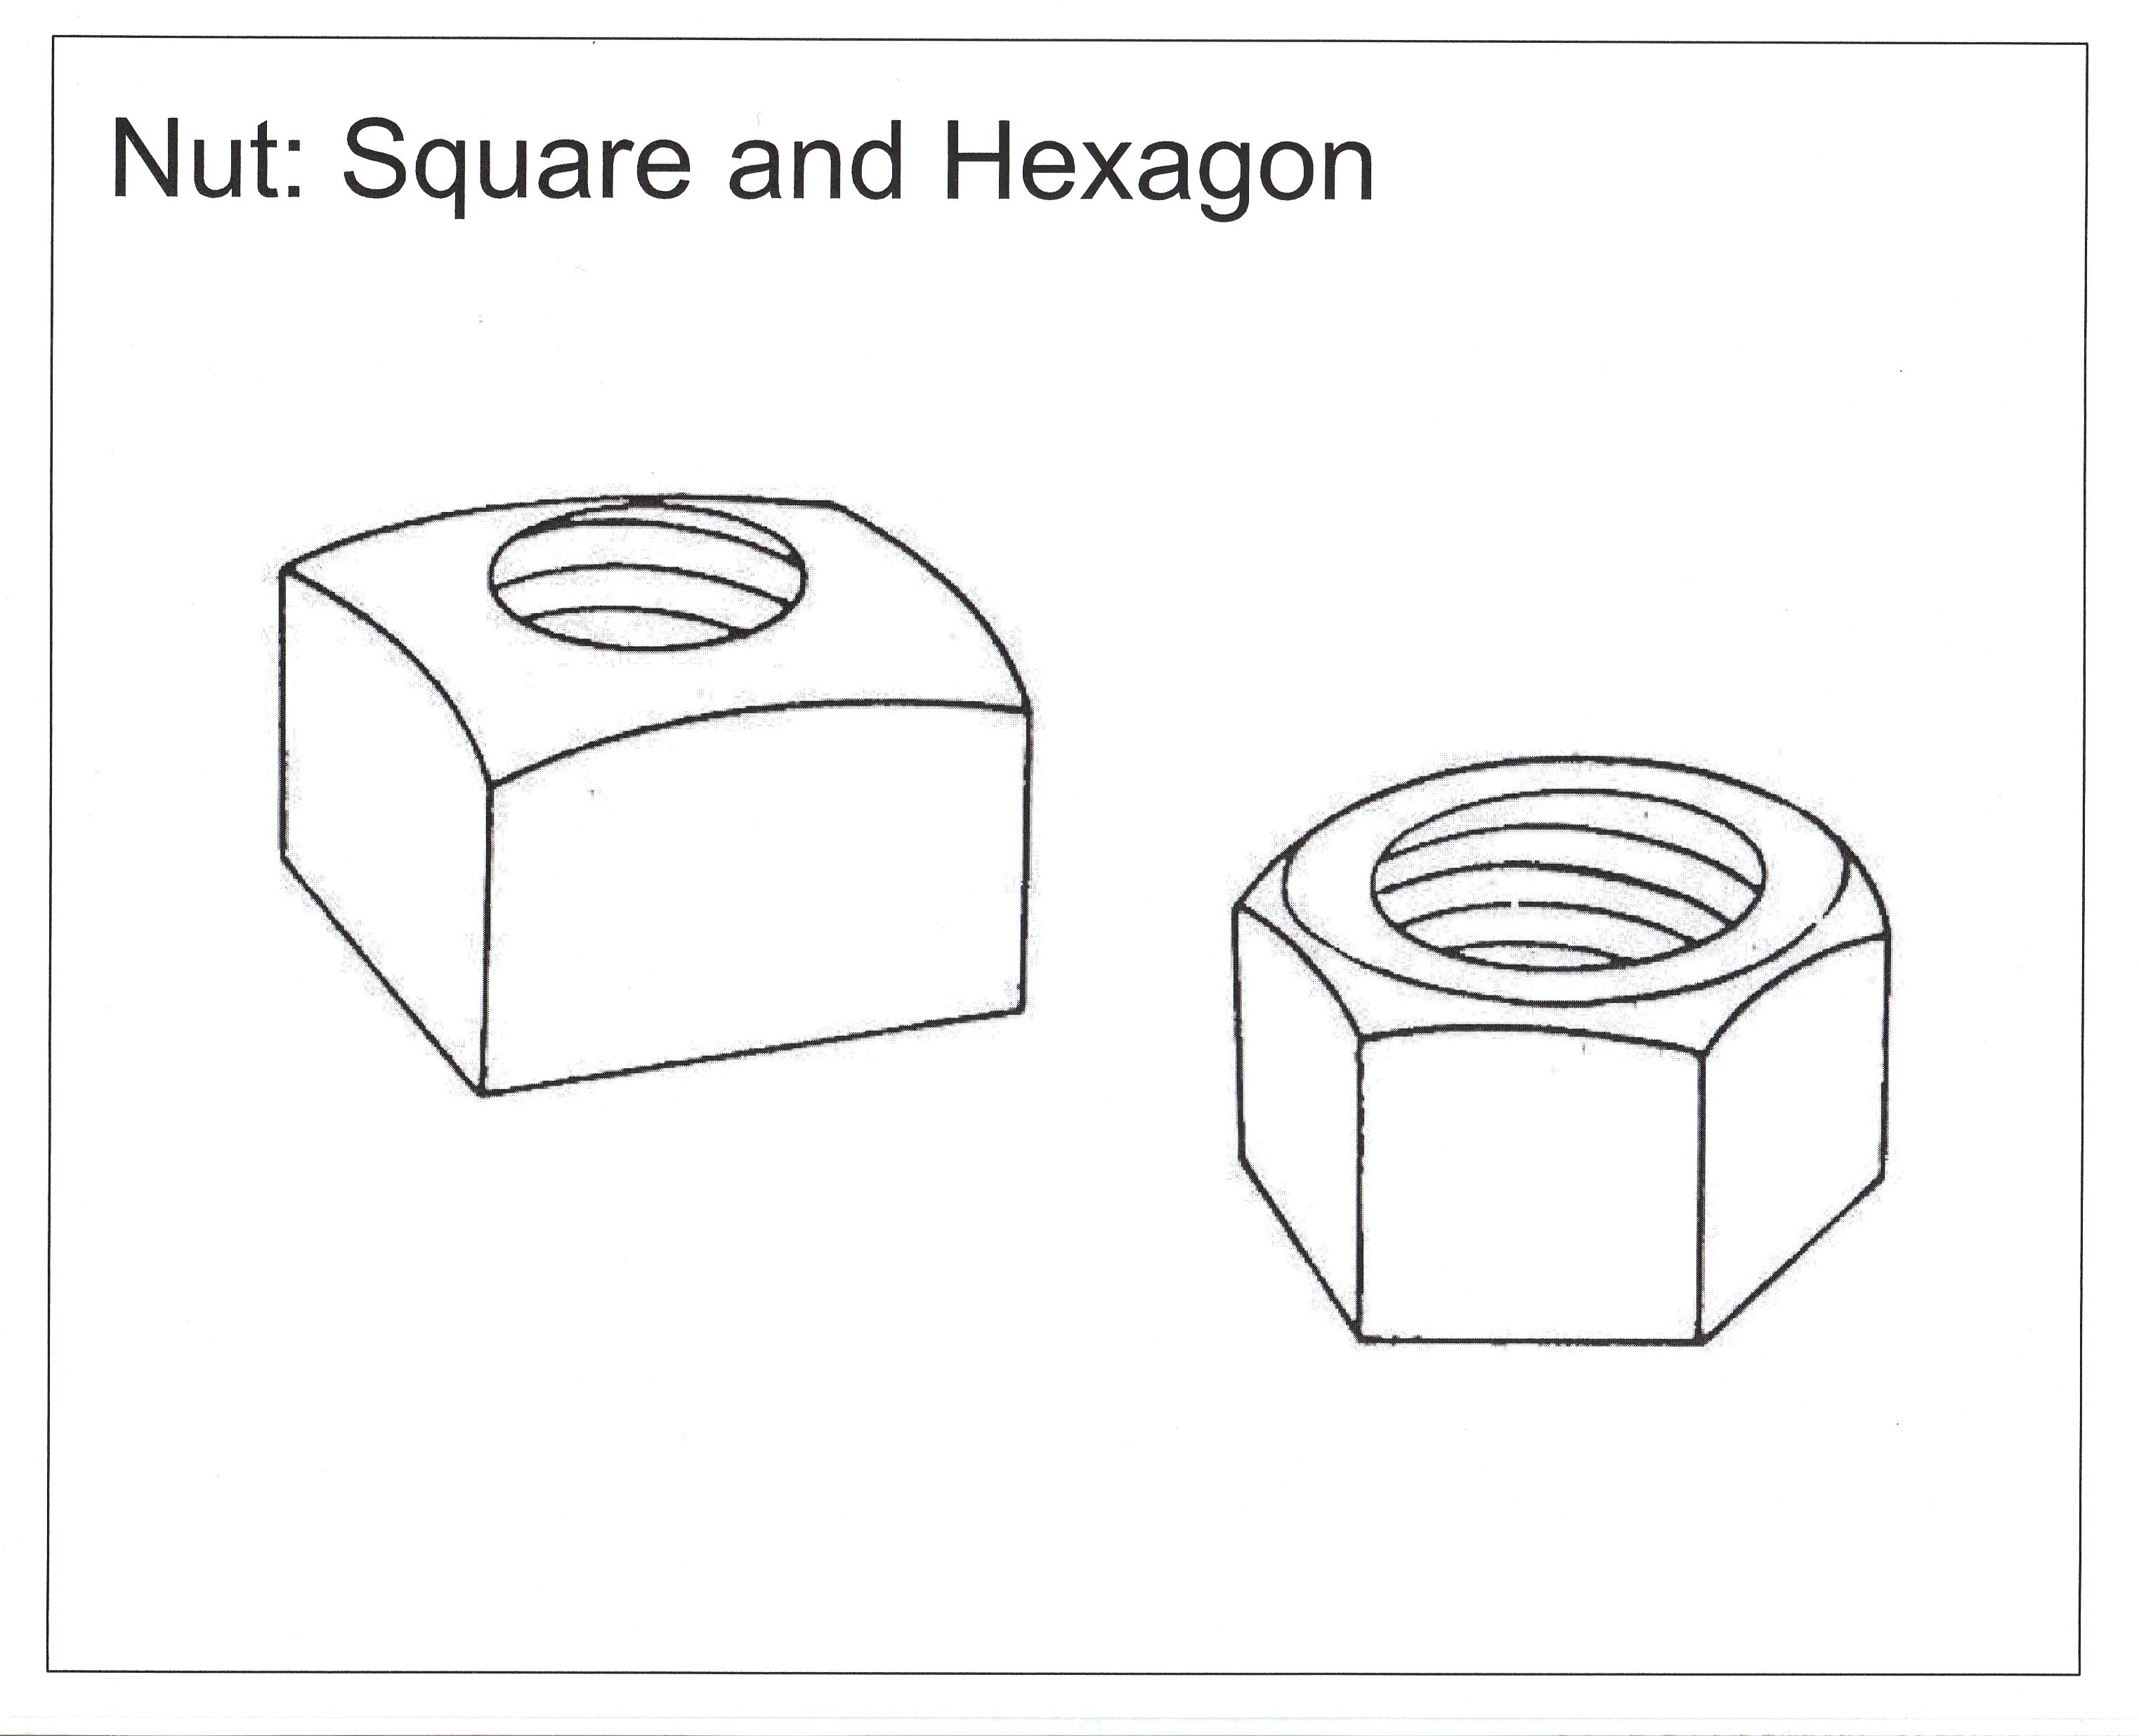 NUT SQUARE AND HEX PAGE 1-21-3.jpg